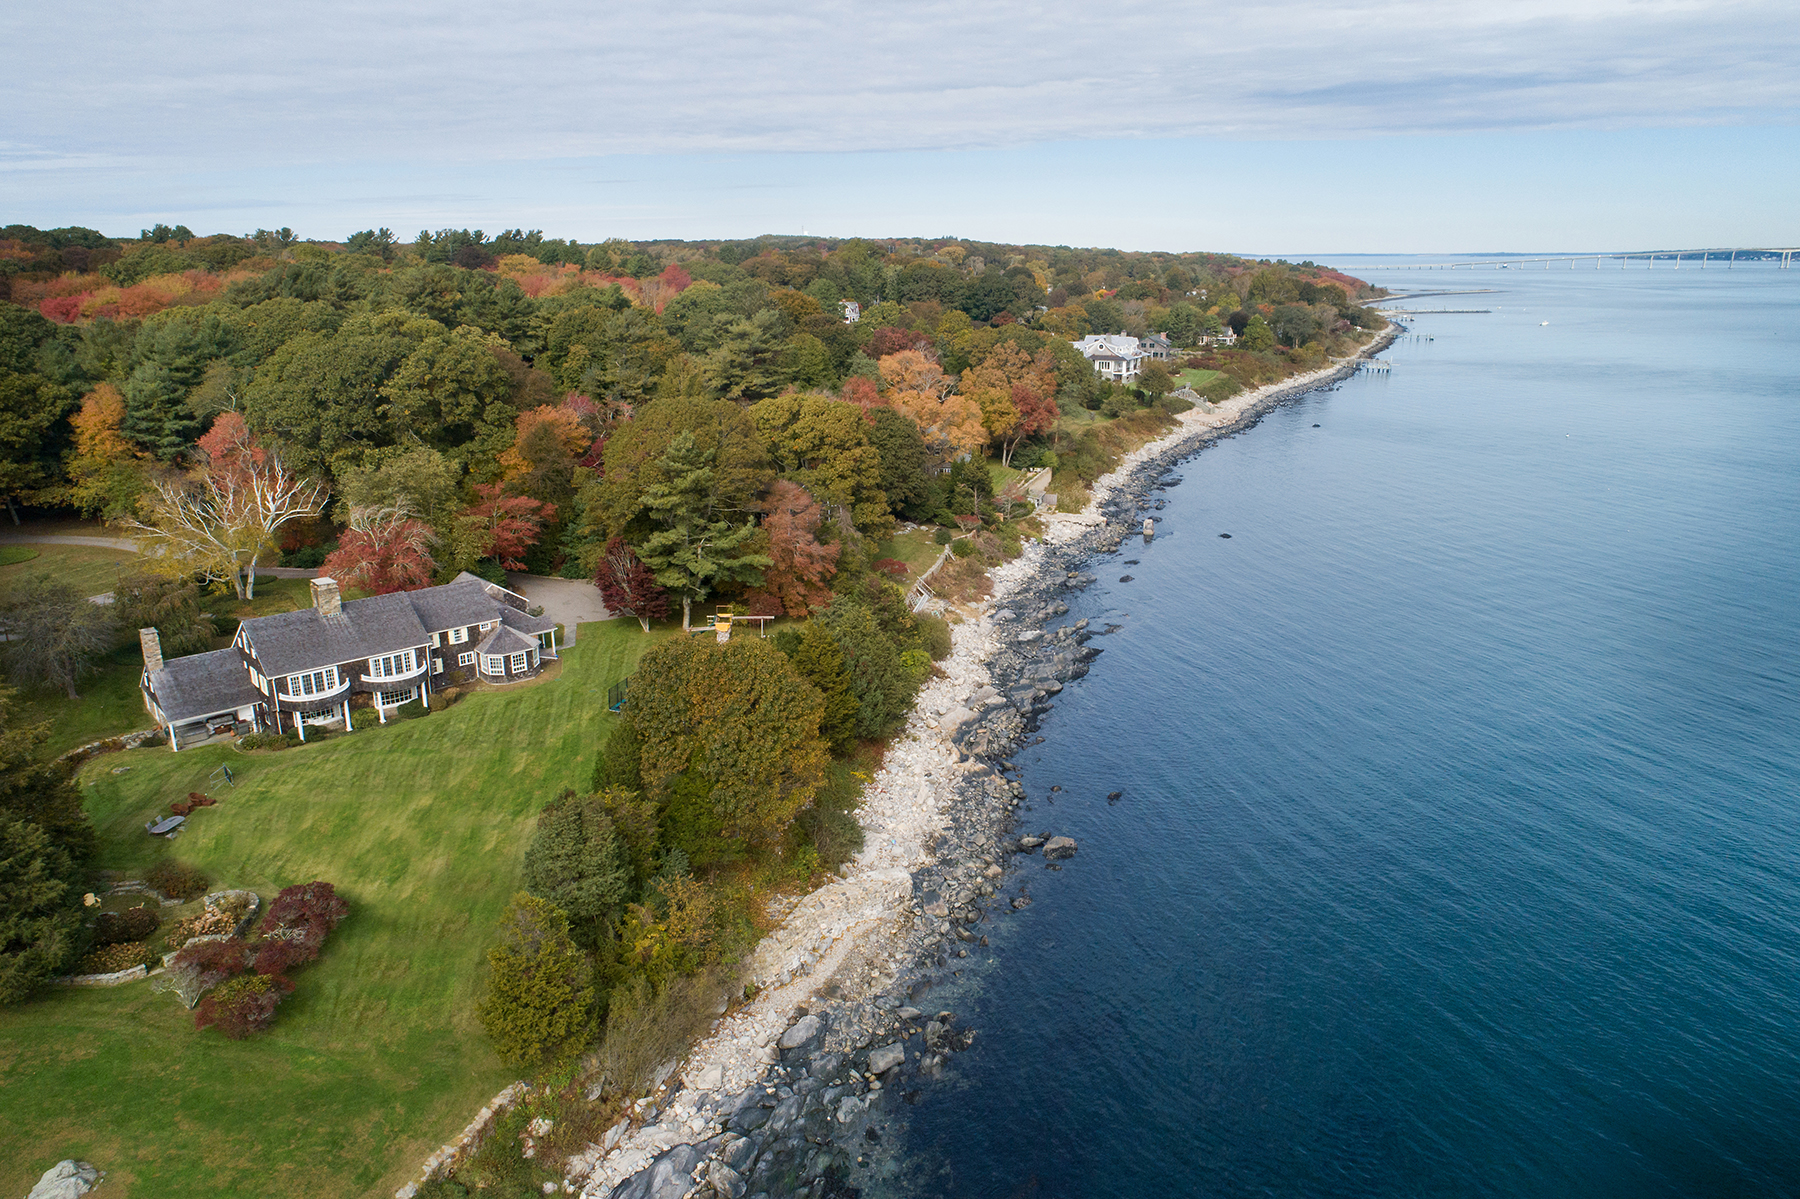 LILA DELMAN COMPASS SELLS OCEANFRONT ESTATE FOR $4.650M, MARKING THE HIGHEST SALE IN SAUNDERSTOWN SINCE 2015*